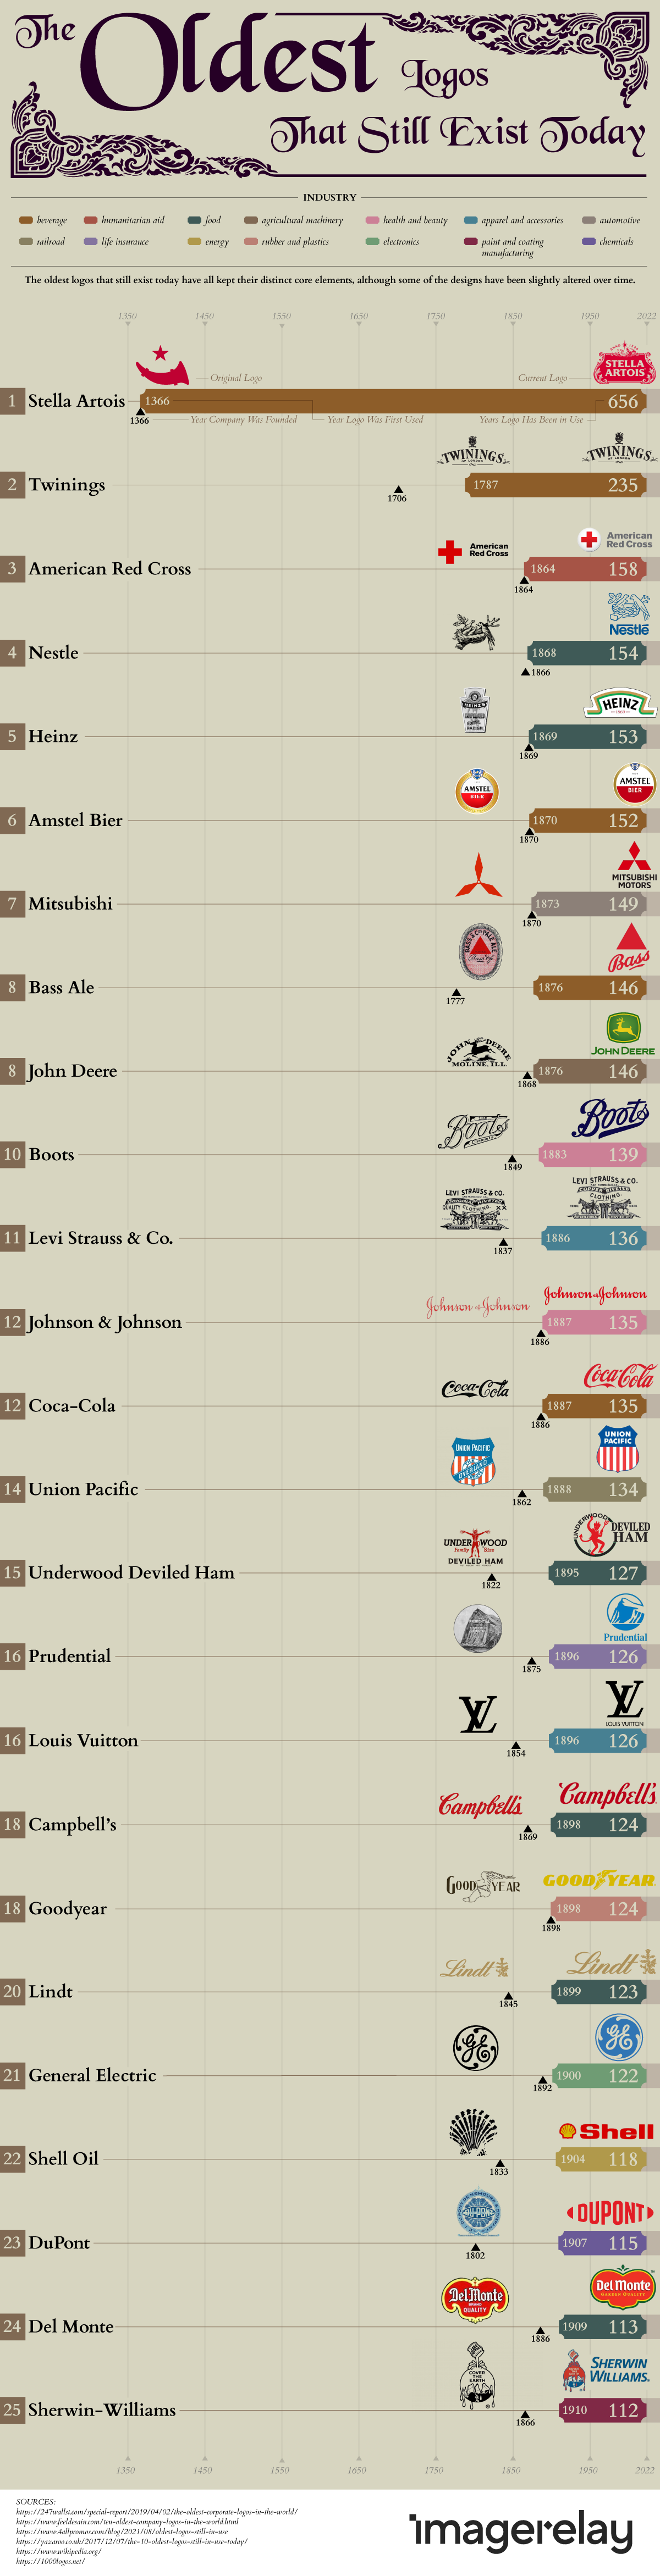 The Oldest Logos That Still Exist Today - Infographic